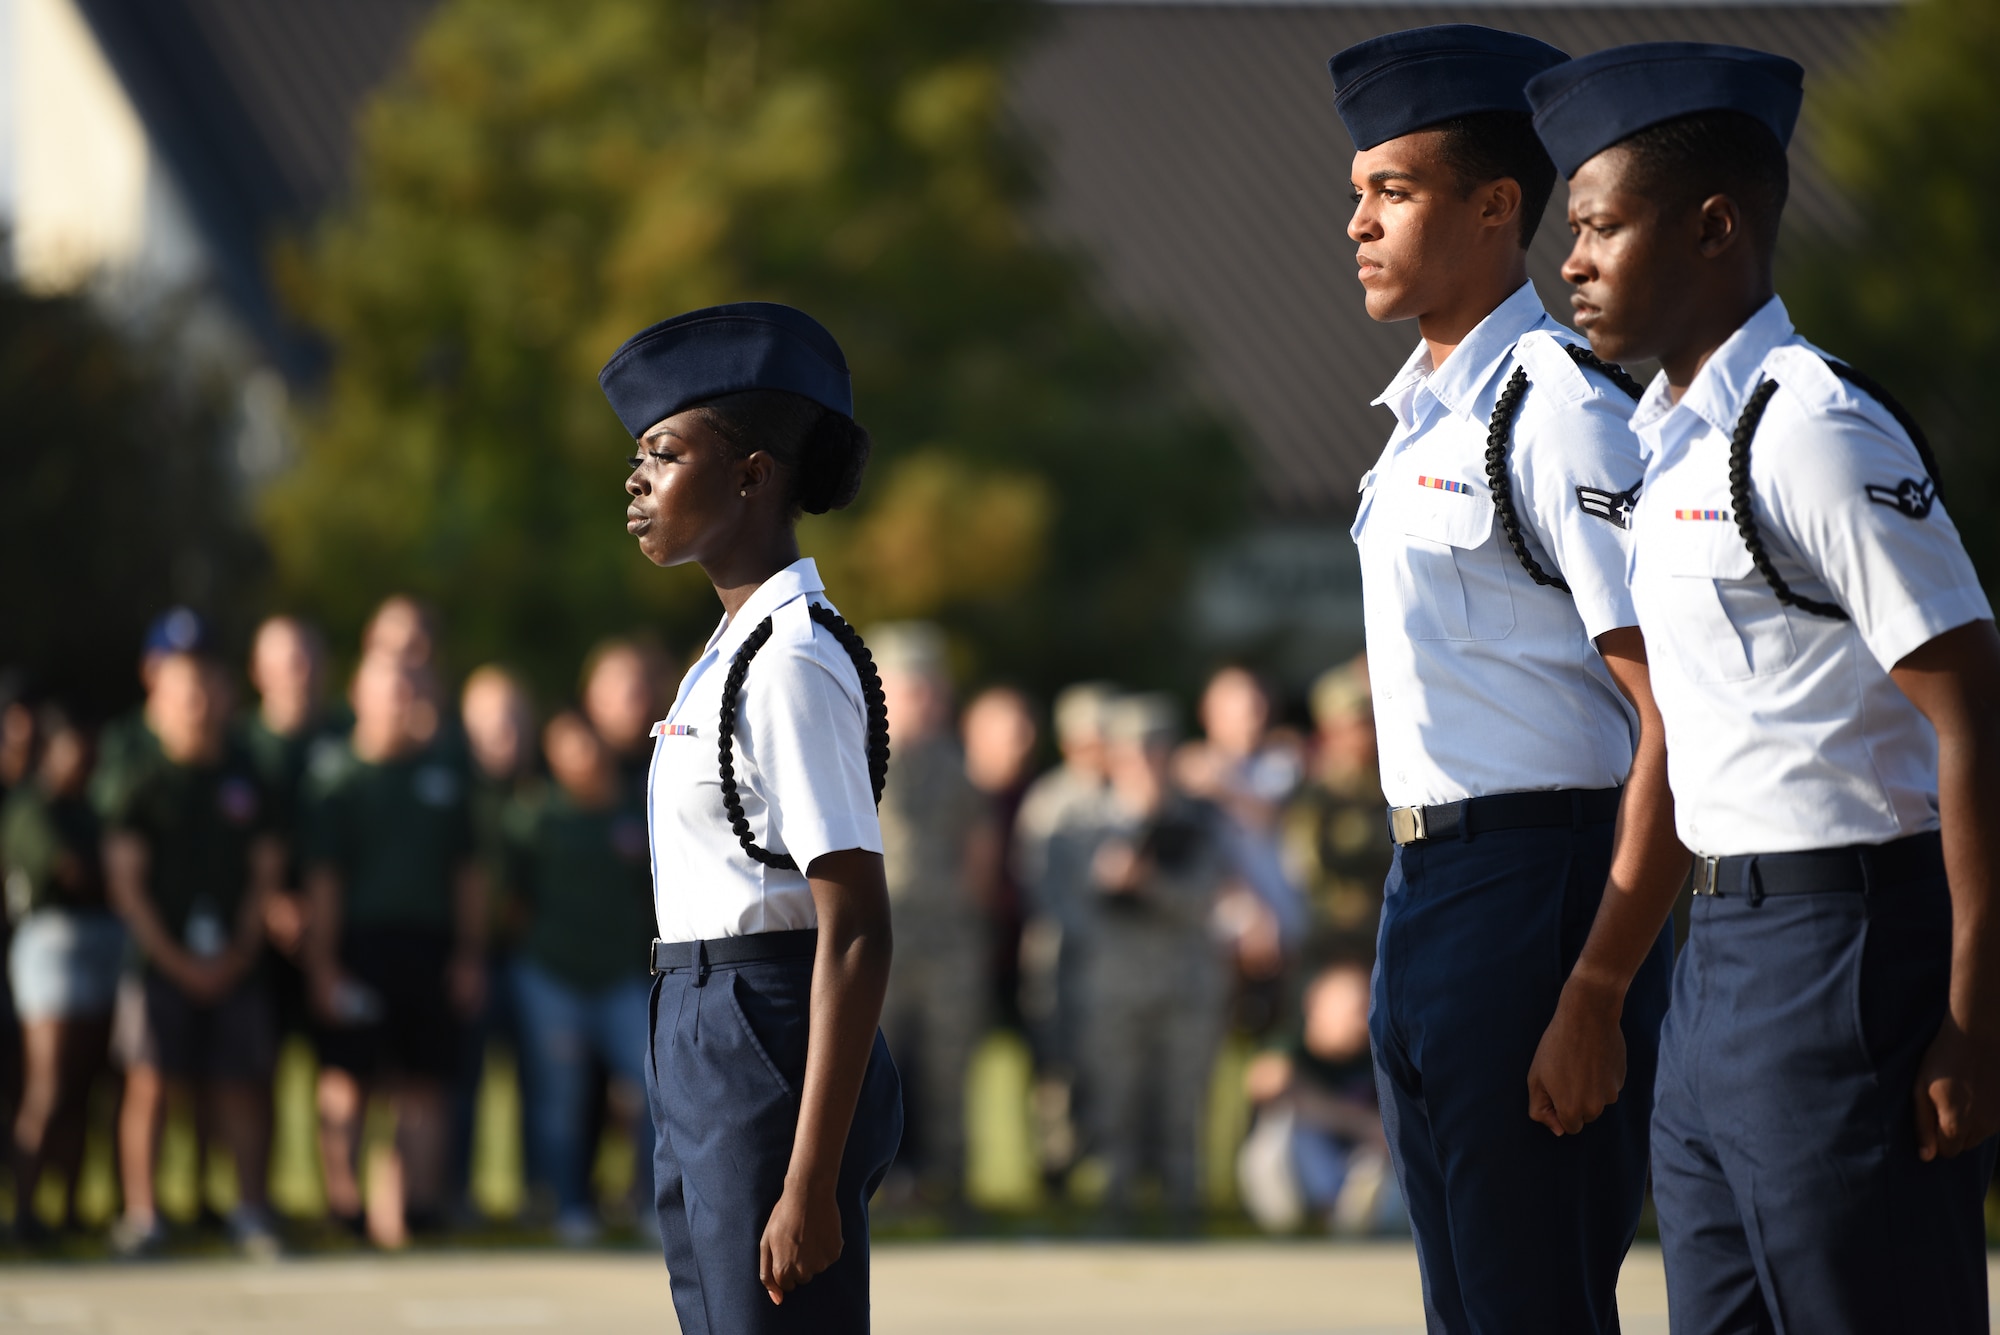 U.S. Air Force Airmen Precious Bissah, Wendell Watson III and Airman 1st Class Enrique Talley, 336th Training Squadron drill team members, perform during the 81st Training Group drill down on the Levitow Training Support Facility drill pad at Keesler Air Force Base, Mississippi, Sept. 20, 2019. Airmen from the 81st TRG competed in a quarterly open ranks inspection, regulation drill routine and freestyle drill routine. While in training, Airmen are given the opportunity to volunteer to learn and execute drill down routines. (U.S. Air Force photo by Airman Seth Haddix)